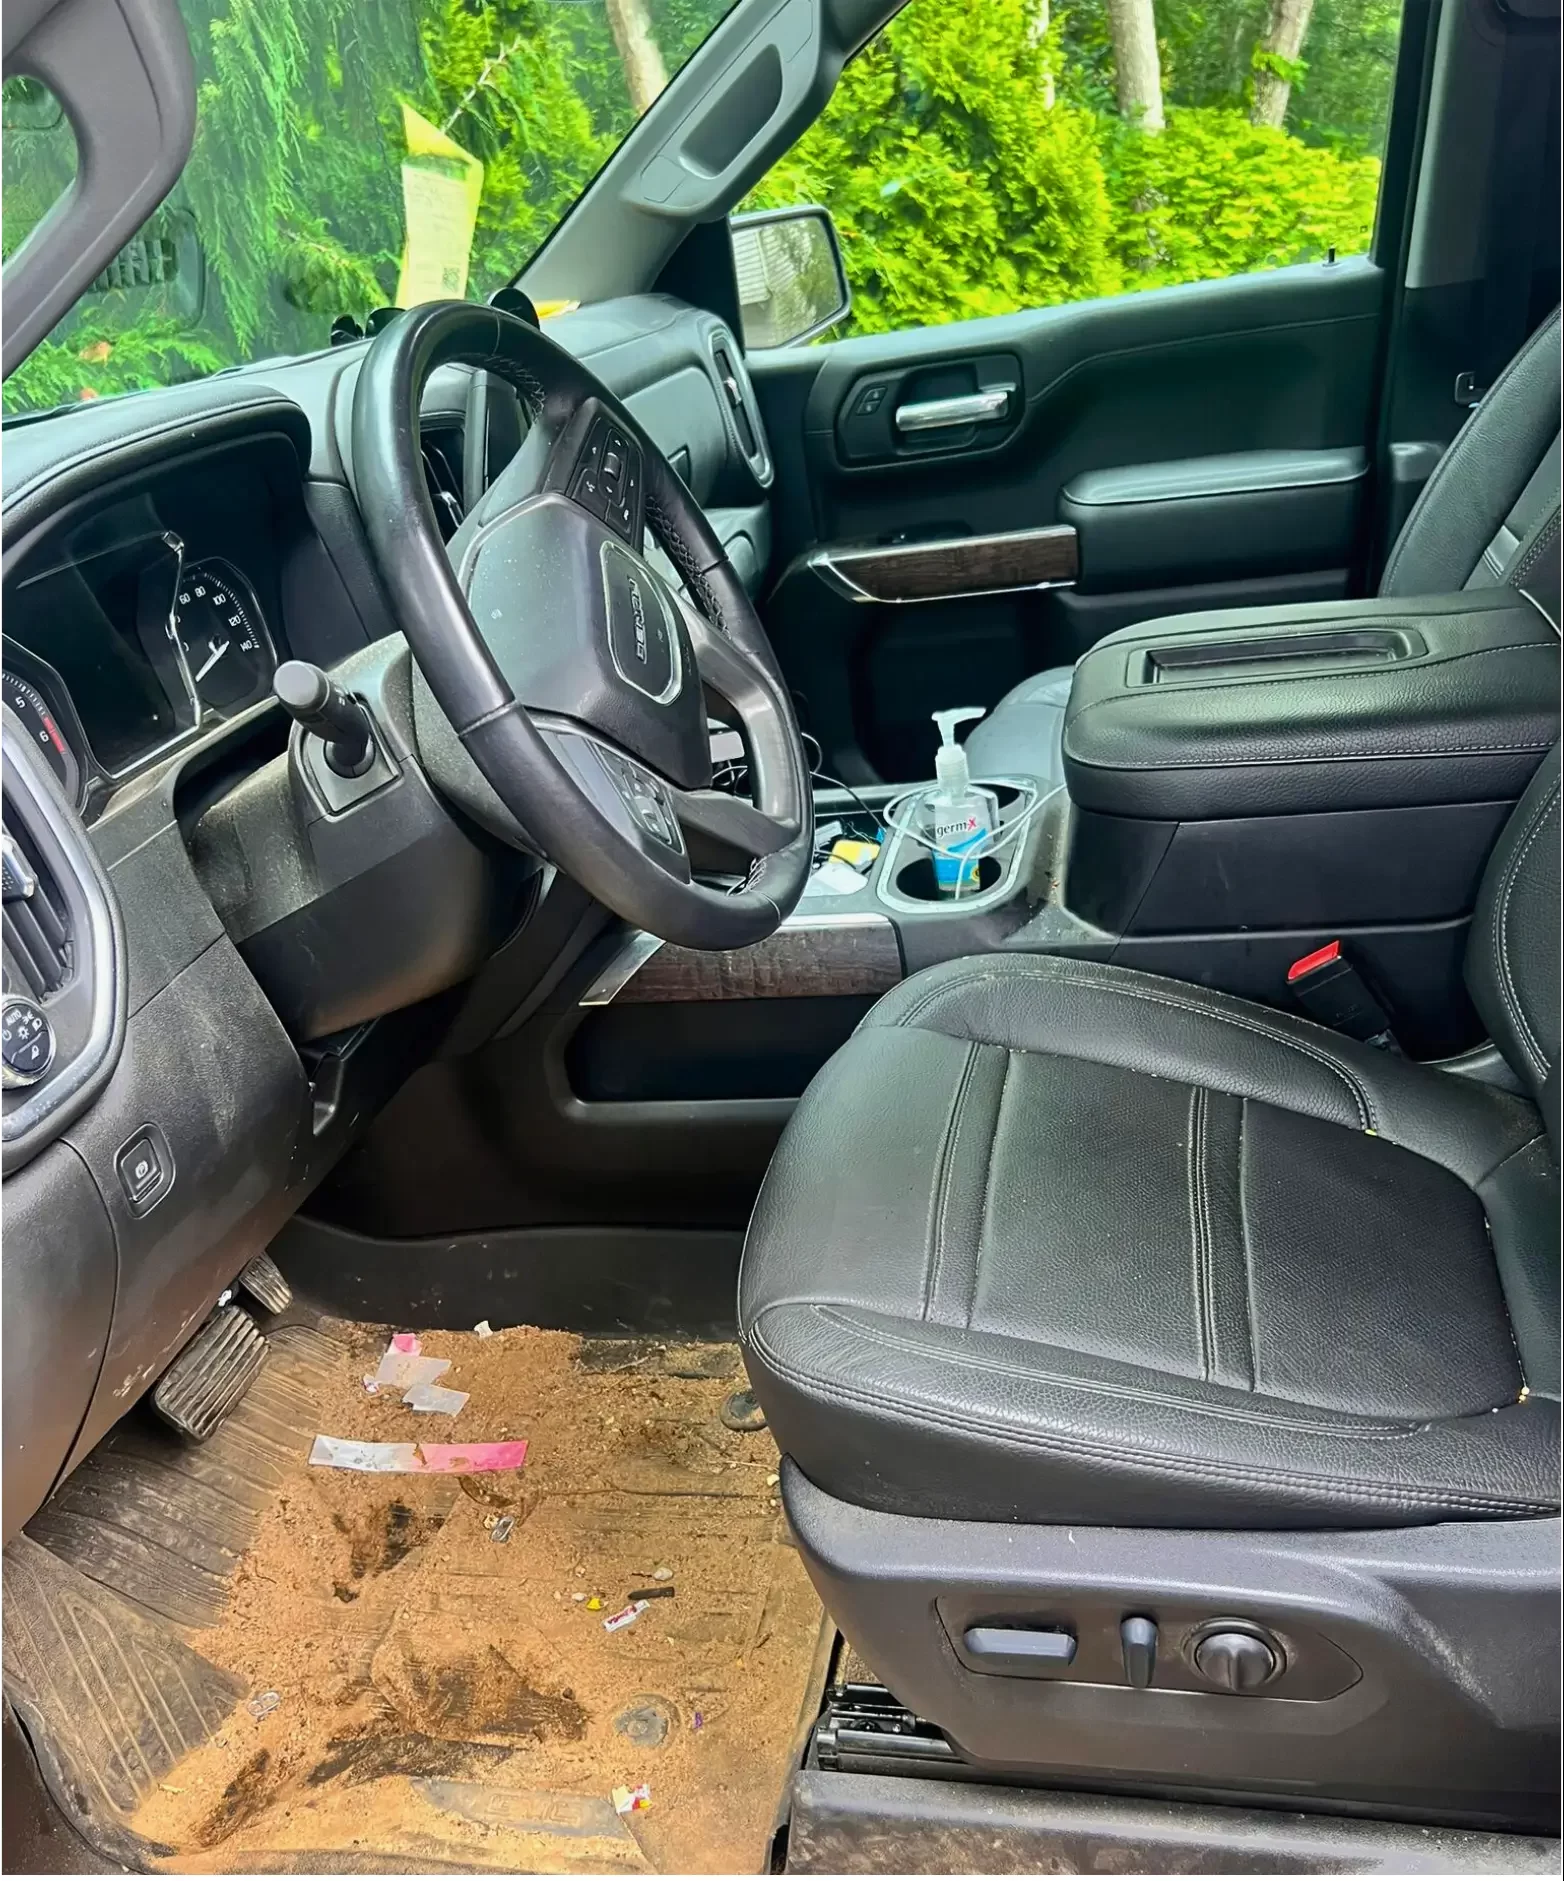 Spotless Auto Detailing - EXCLUSIVE PROFESSIONAL AUTO CLEANING AT MARTHA'S VINEYARD! Our committed team provides unmatched services, ensuring peace of mind and confidence for Martha's Vineyard residents and tourists. Book now and let your car bask in the radiance of spotlessness!